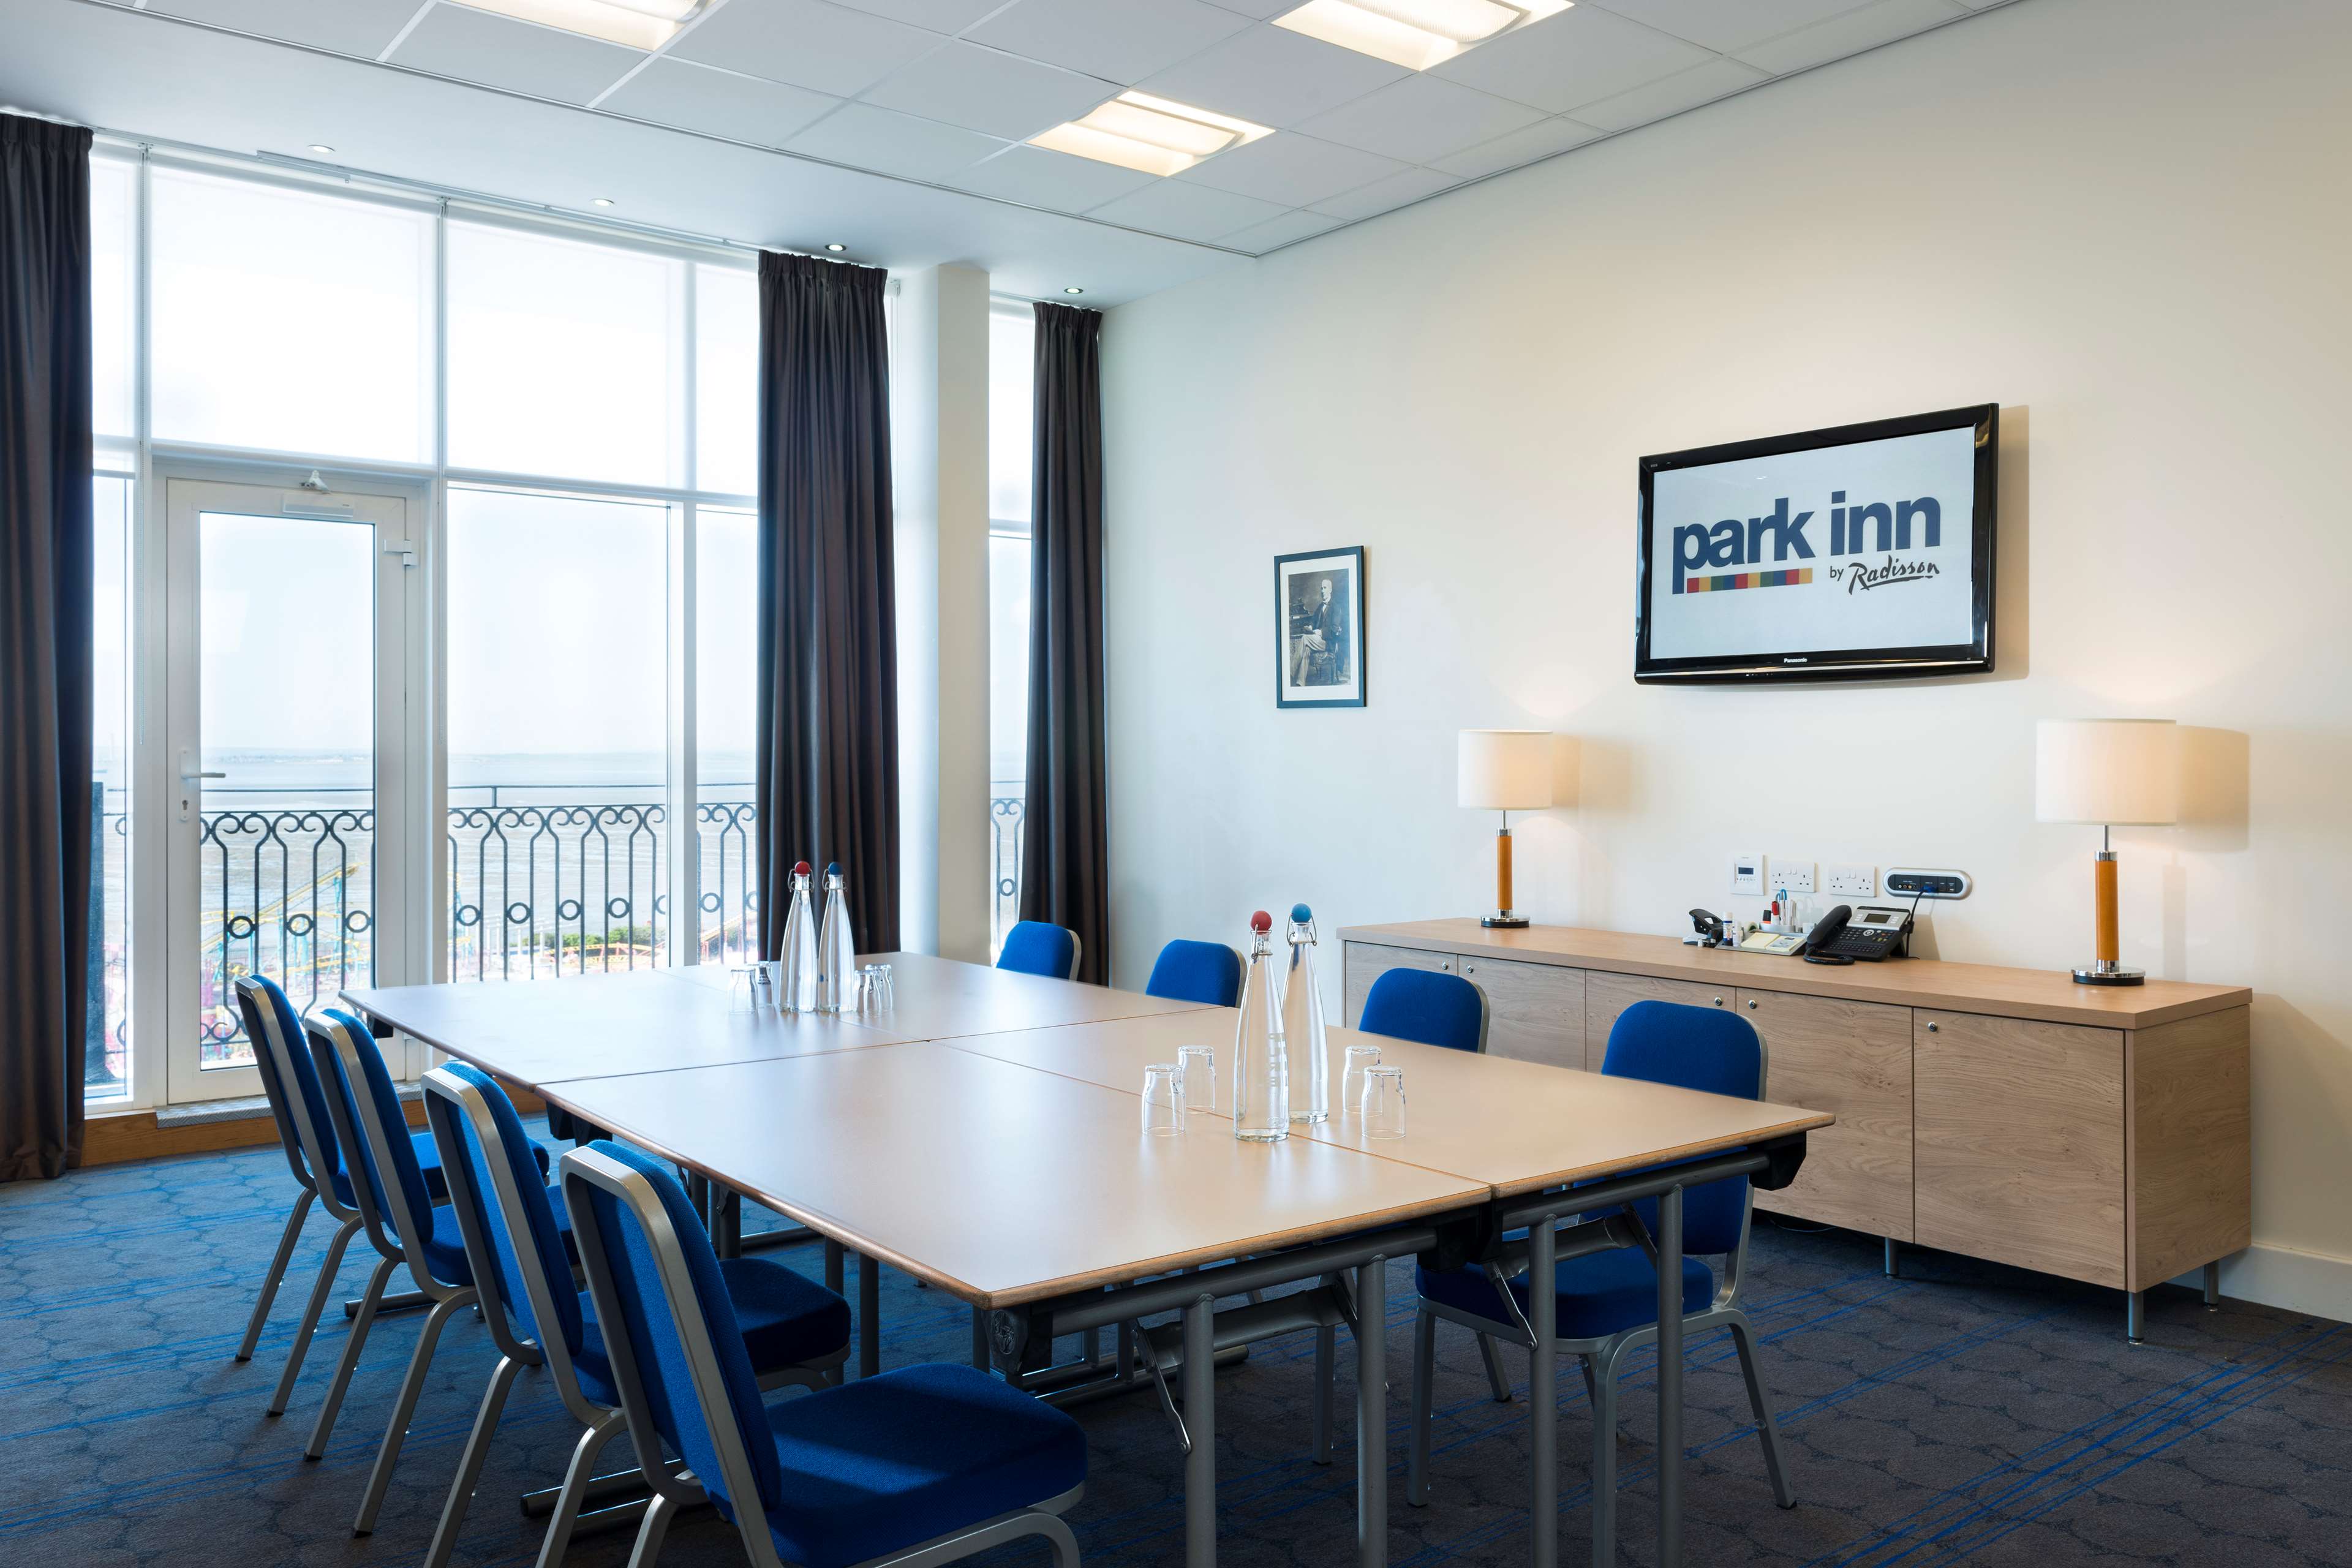 Images Park Inn by Radisson Palace, Southend-on-Sea